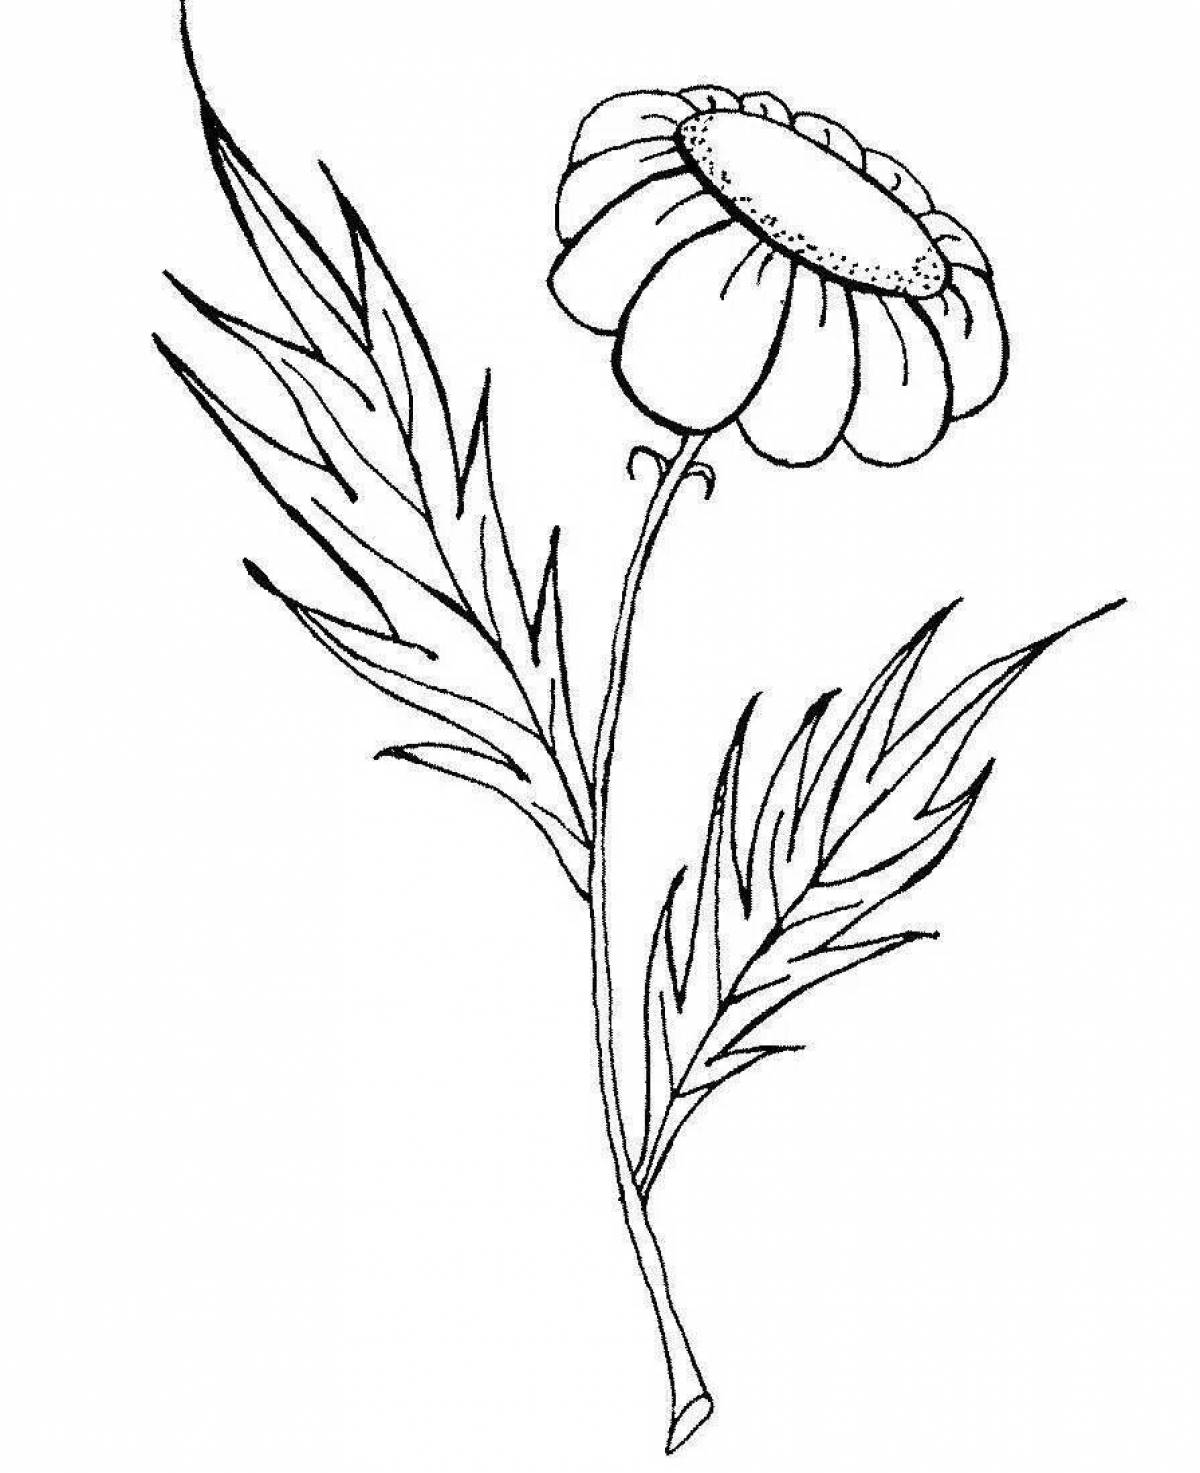 Delightful drawing of chamomile coloring book